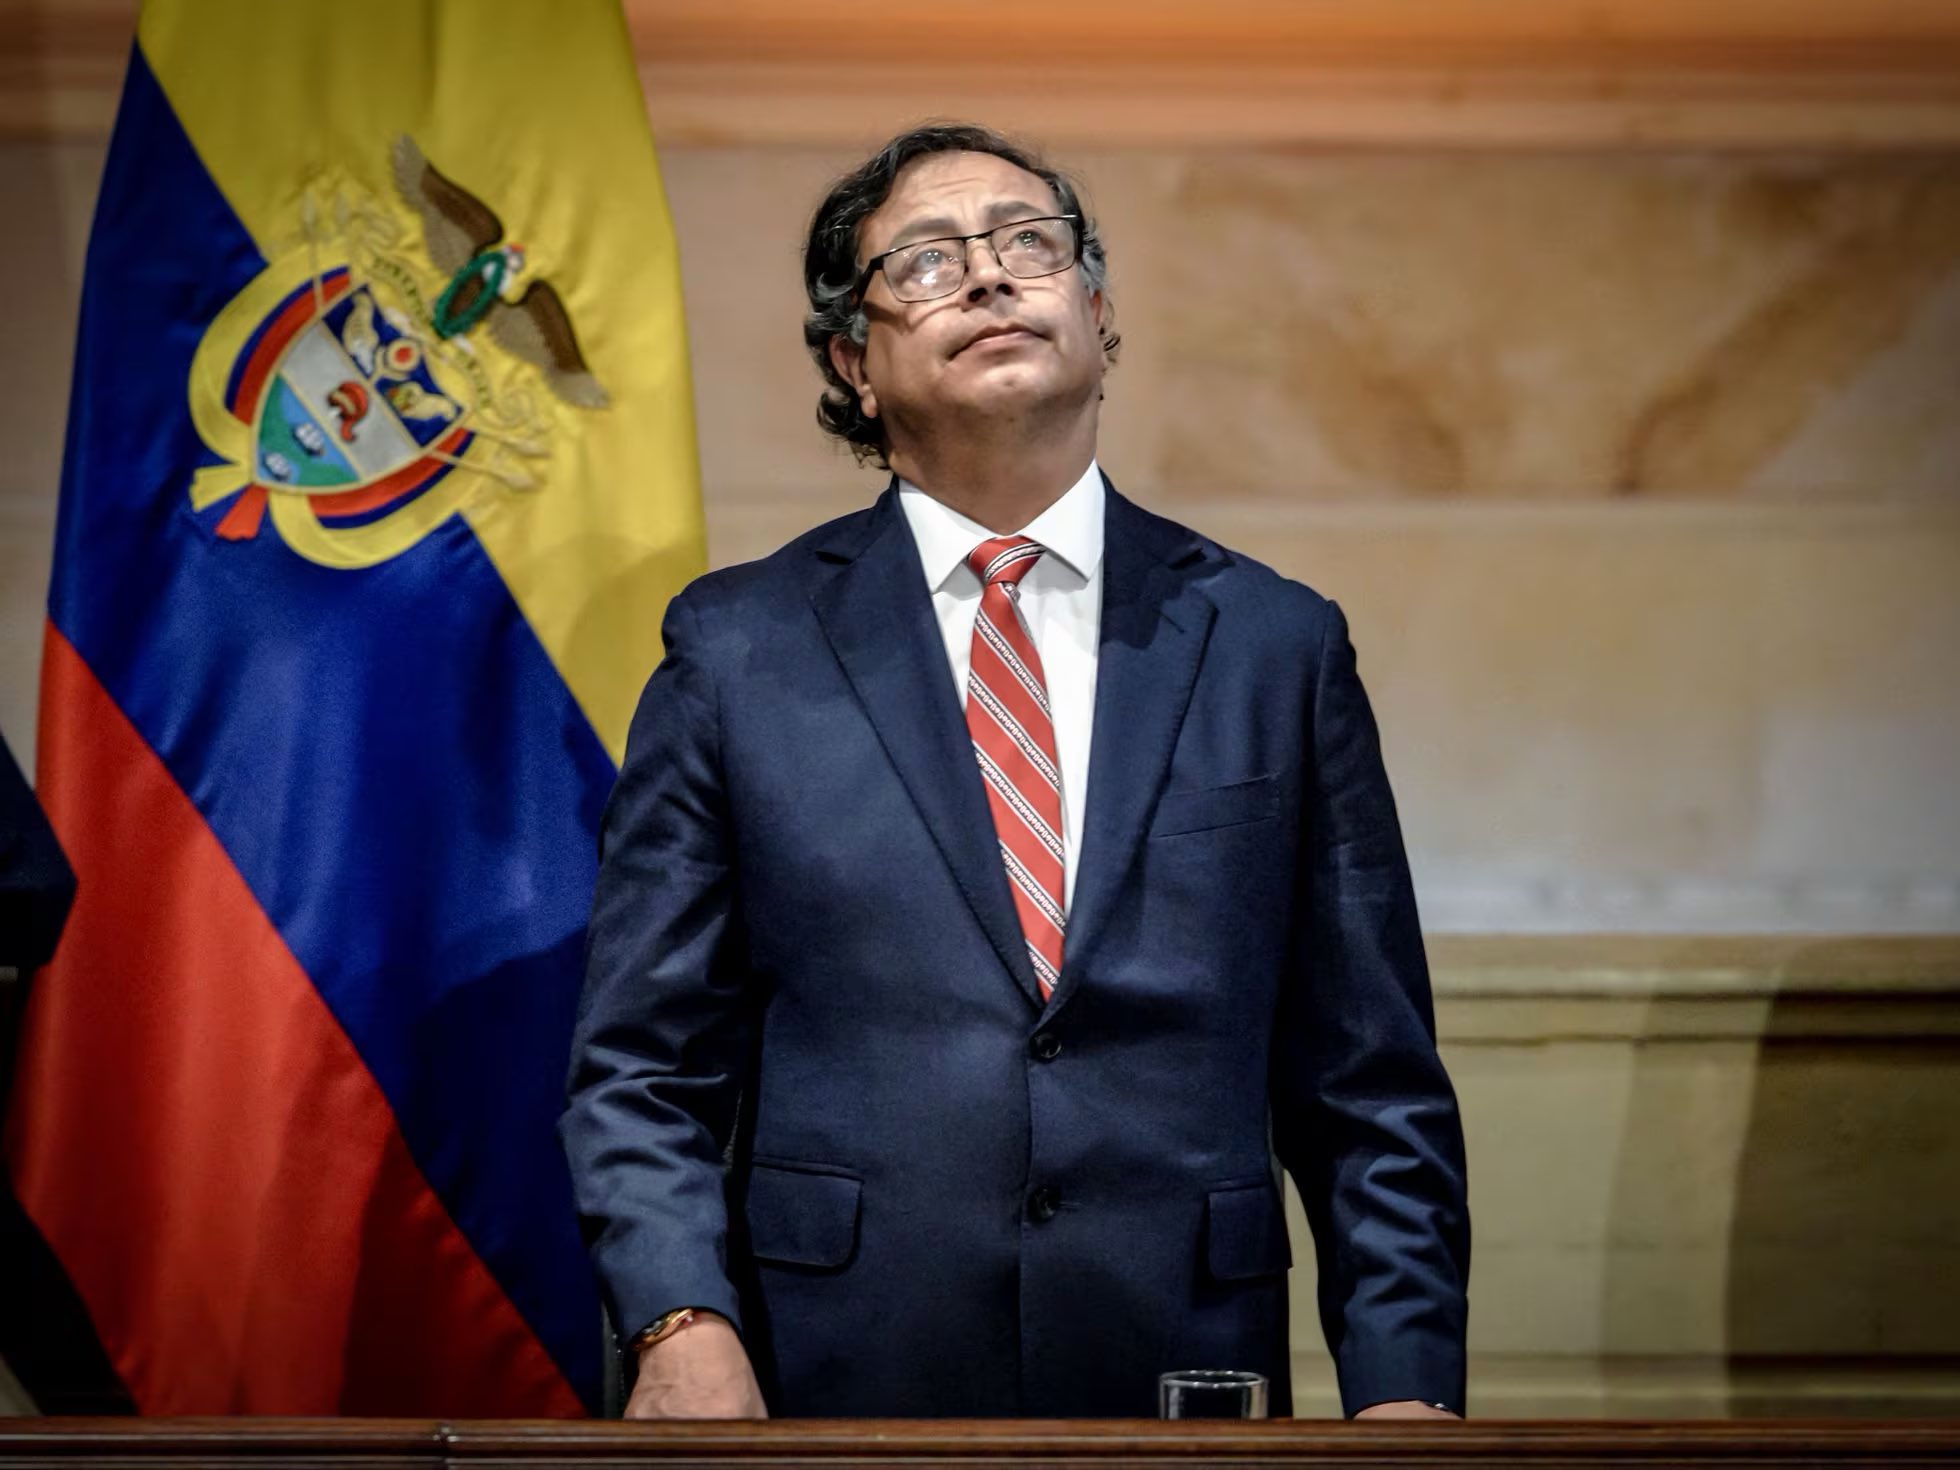 President Gustavo Petro said Wednesday that Colombia will sever diplomatic ties with Israel, whose leader he described as "genocidal" in its war in Gaza.